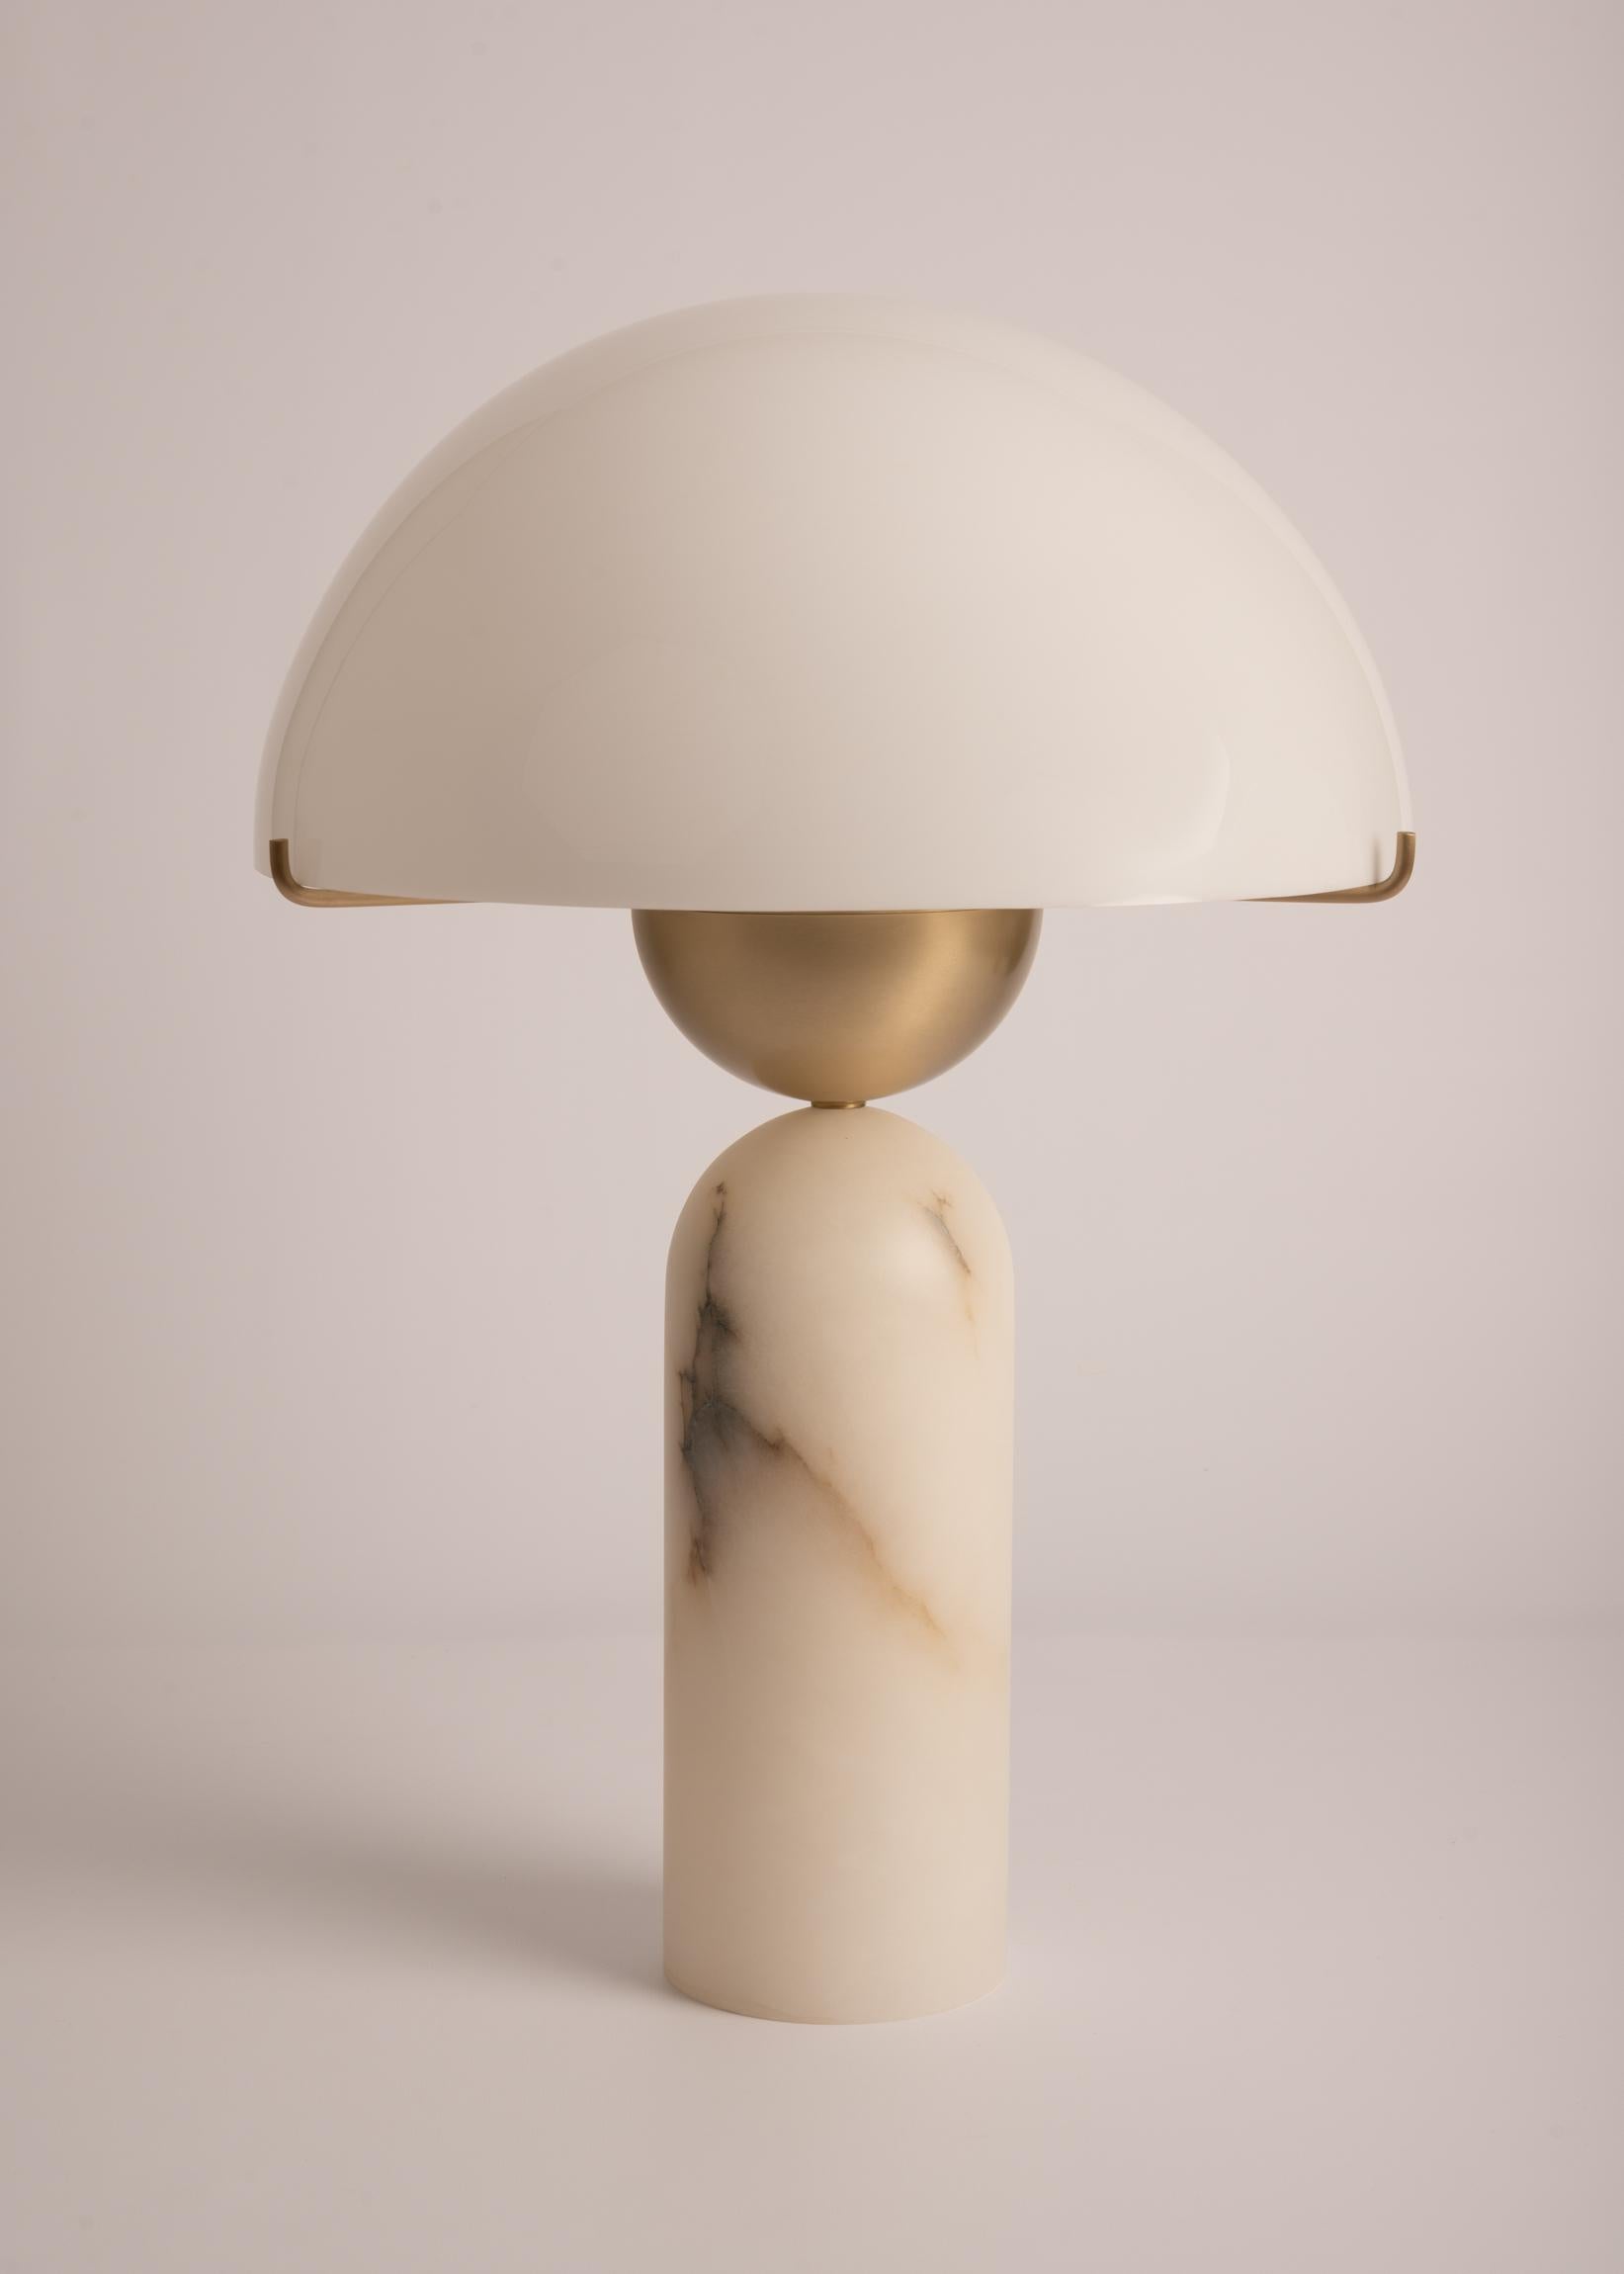 Spherical lines layered elegantly to form a bold, modern shape. The Peono table lamp marries materials and plays with contrasts. Alabaster, marble or wood can be associated to the solid brass halfsphere and its acrylic dome, difusing a soft milky